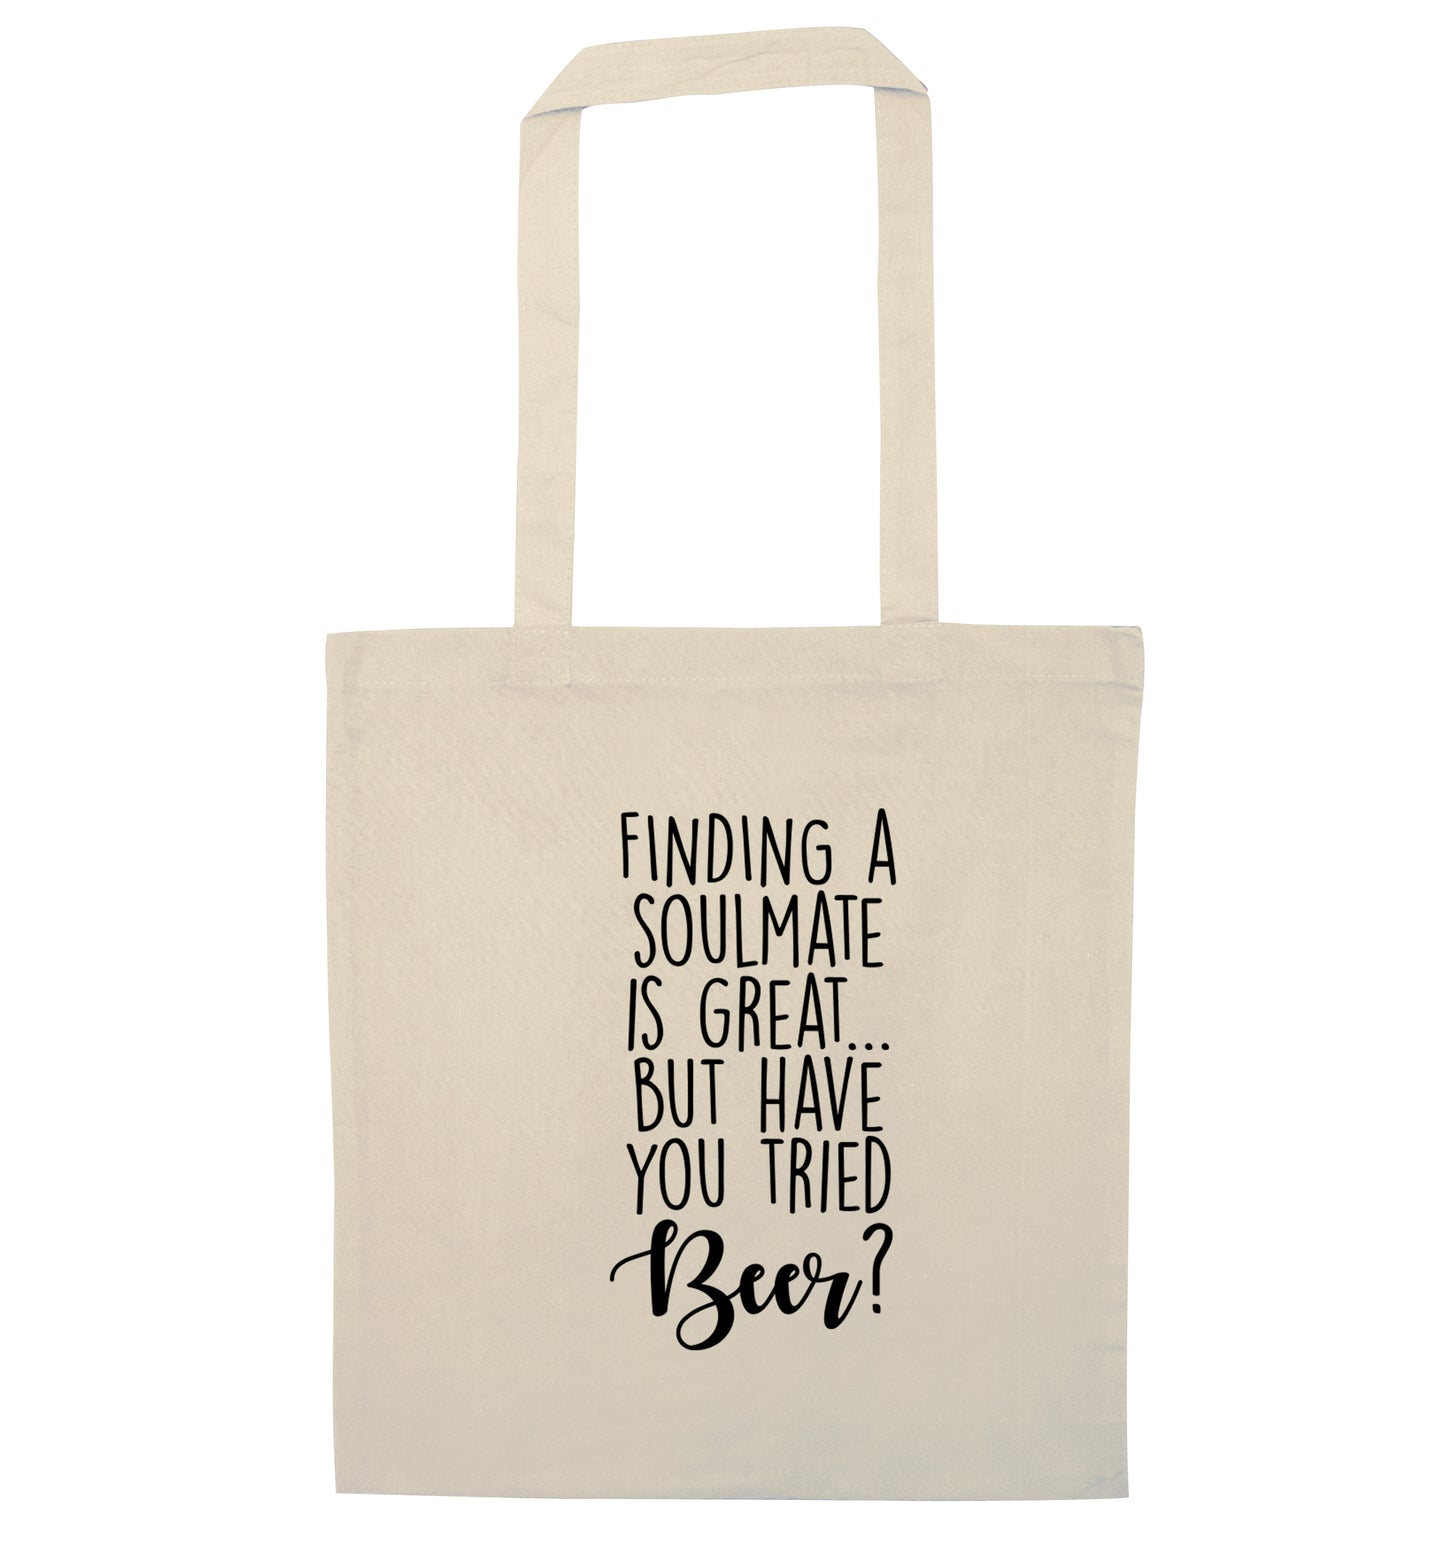 Finding a soulmate is great but have you tried beer? natural tote bag